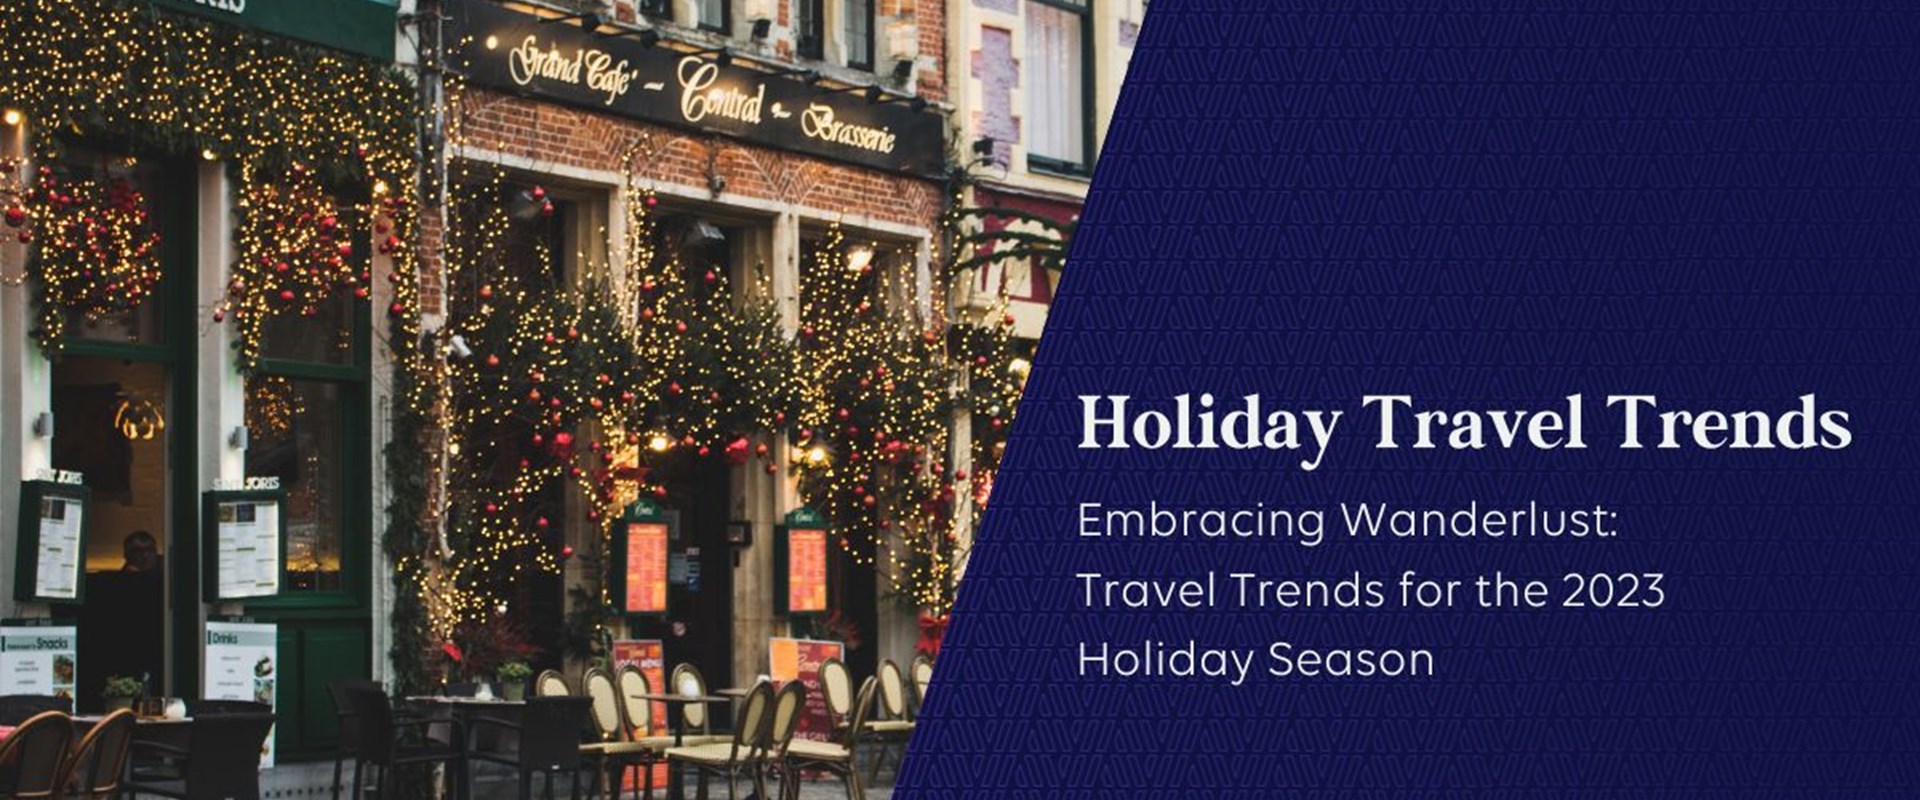 Travel Trends for the 2023 Holiday Season